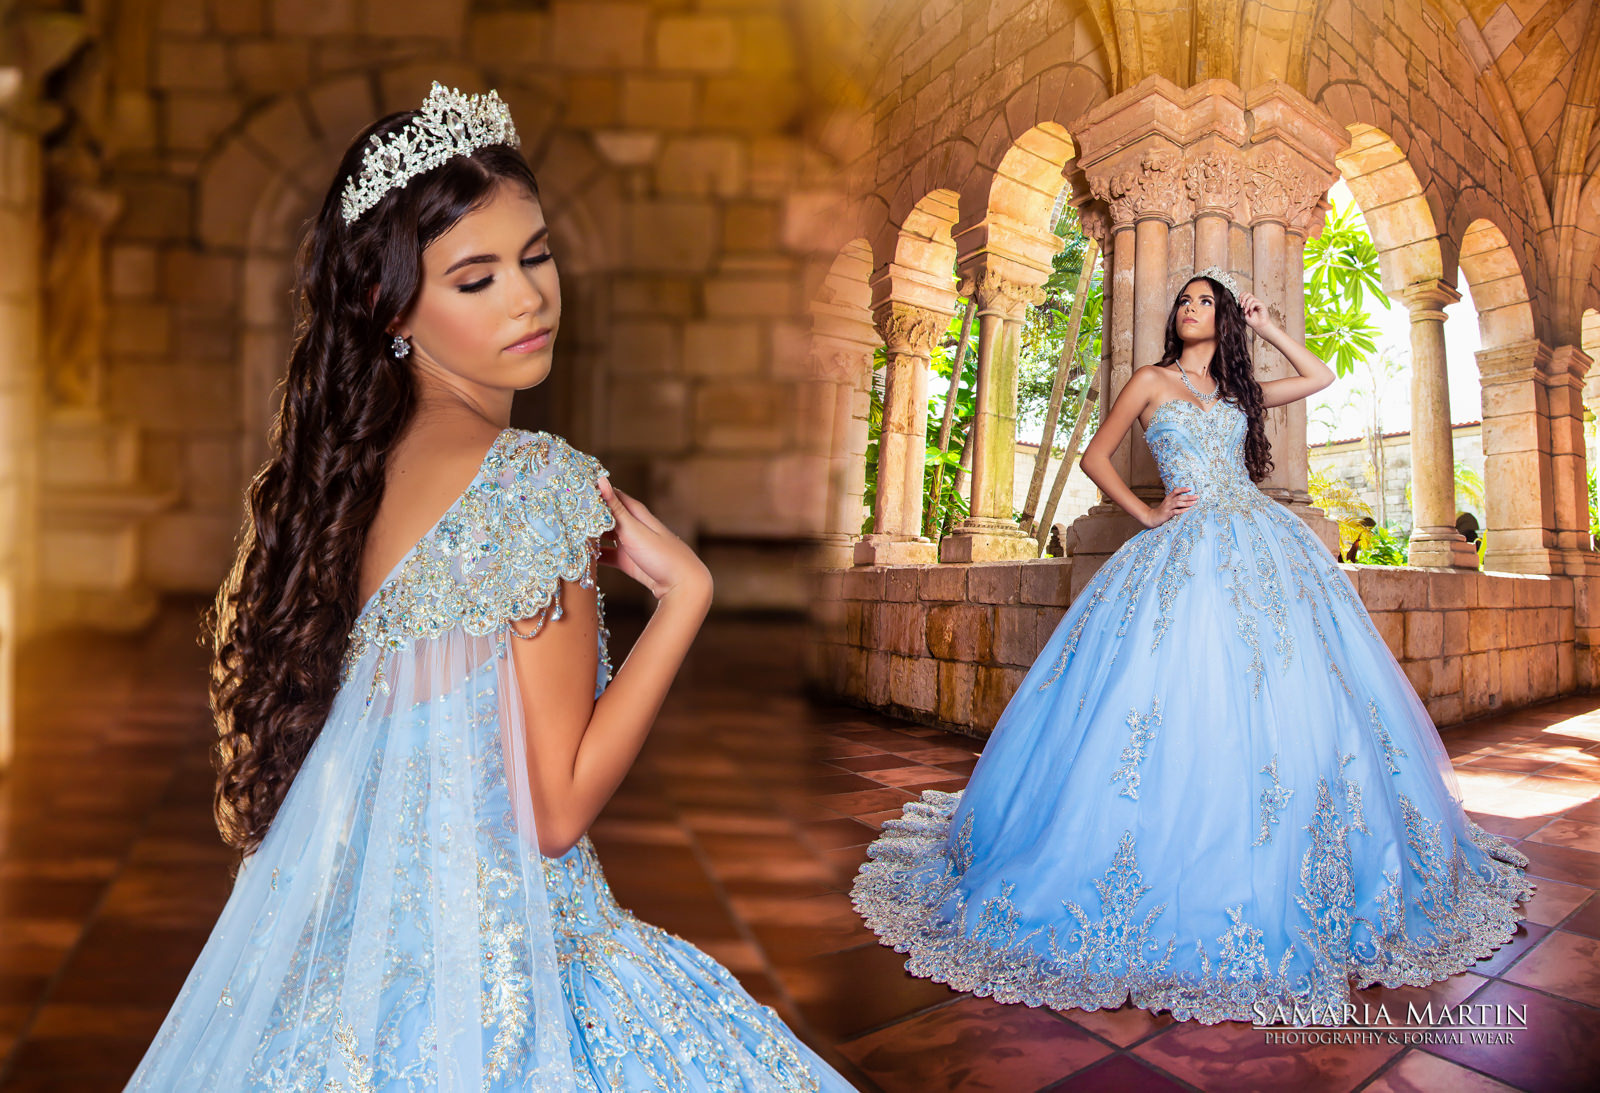 Quinceanera Miami, Quince Photography, Quinceanera Photo Studio, Quinceanera Photography Packages, Samaria Photography 1